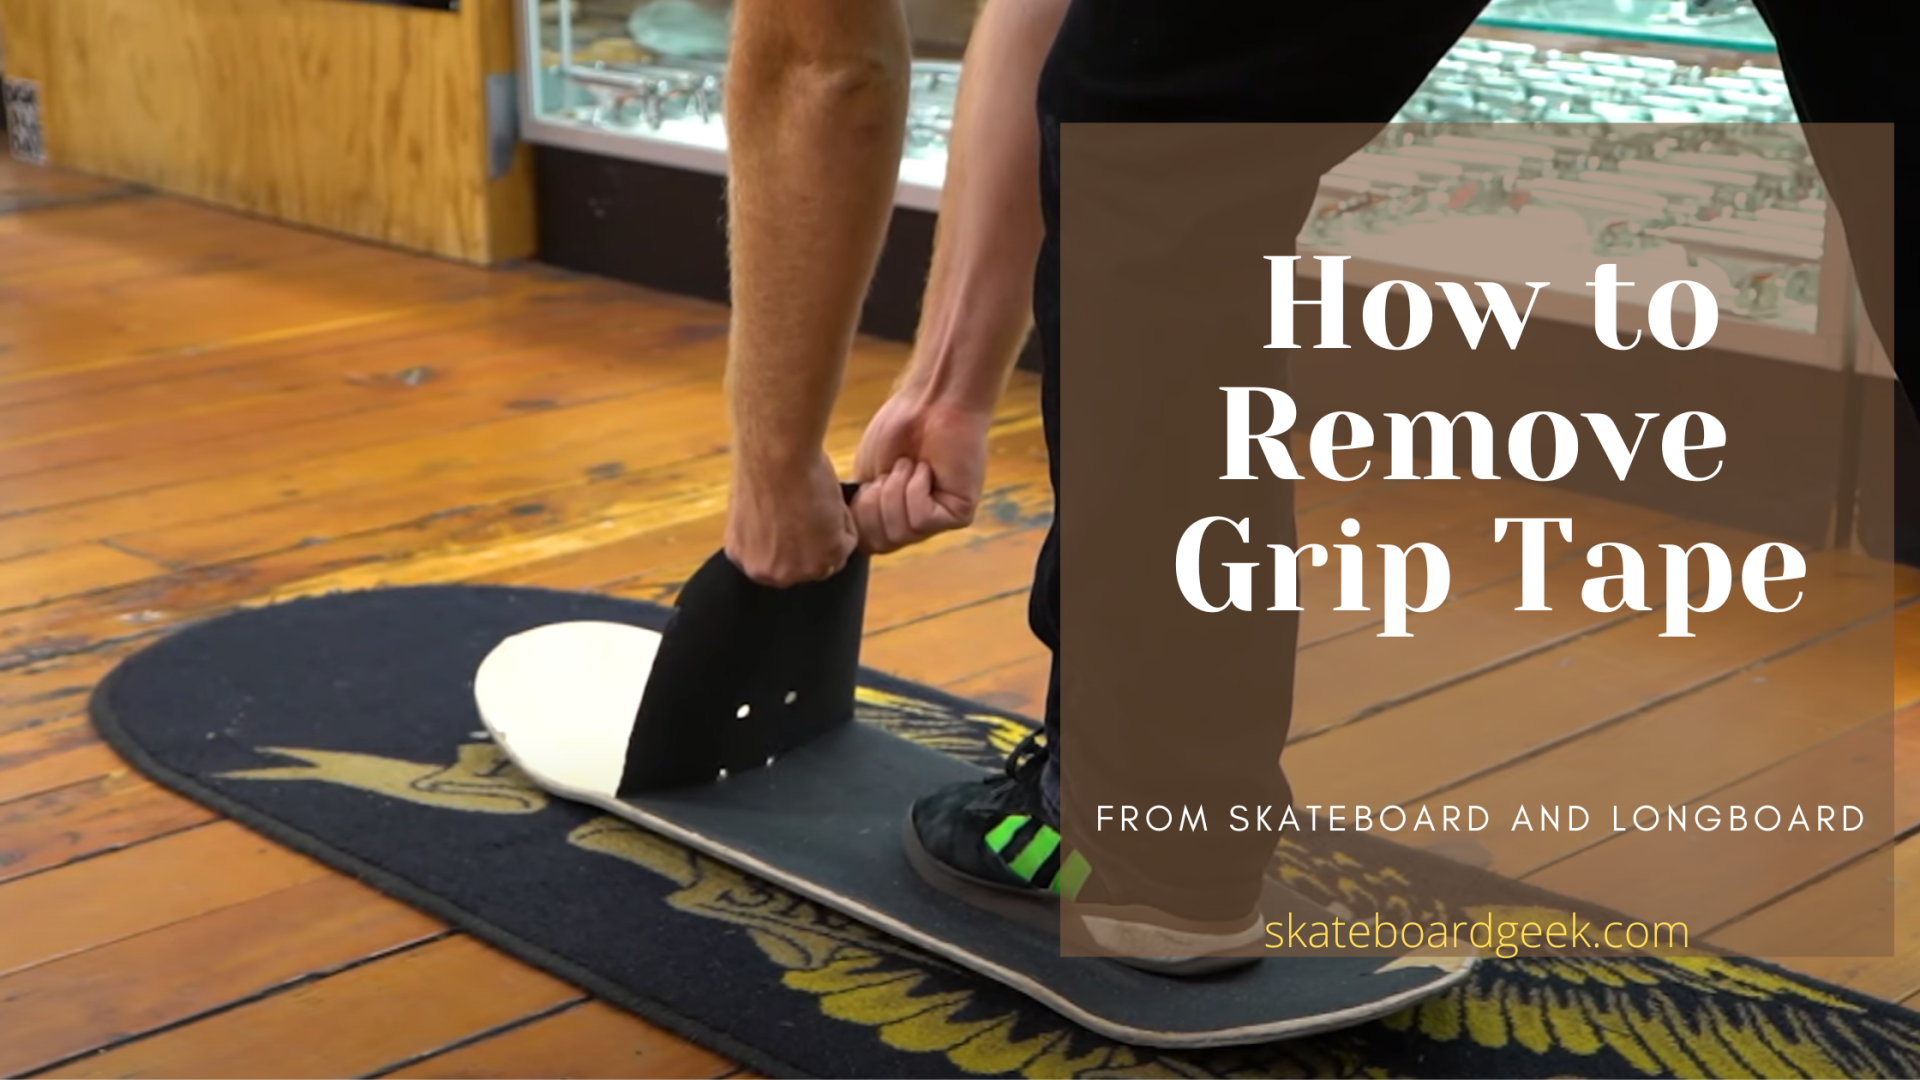 How to Remove Grip Tape